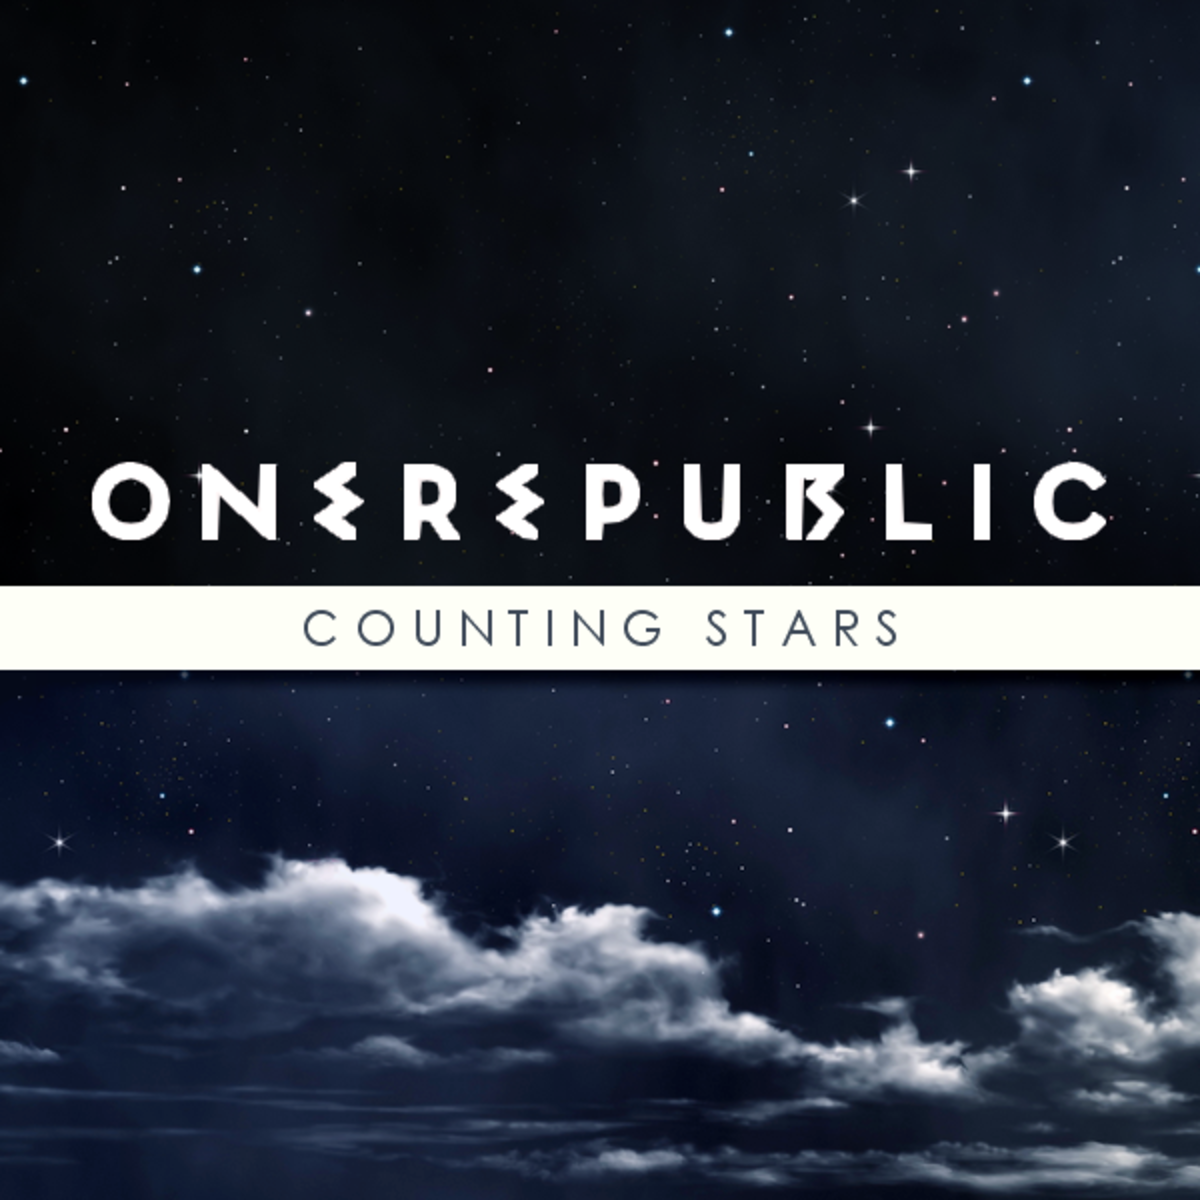 Counting stars simply. Counting the Stars. ONEREPUBLIC обложка. ONEREPUBLIC counting. Counting Stars обложка.